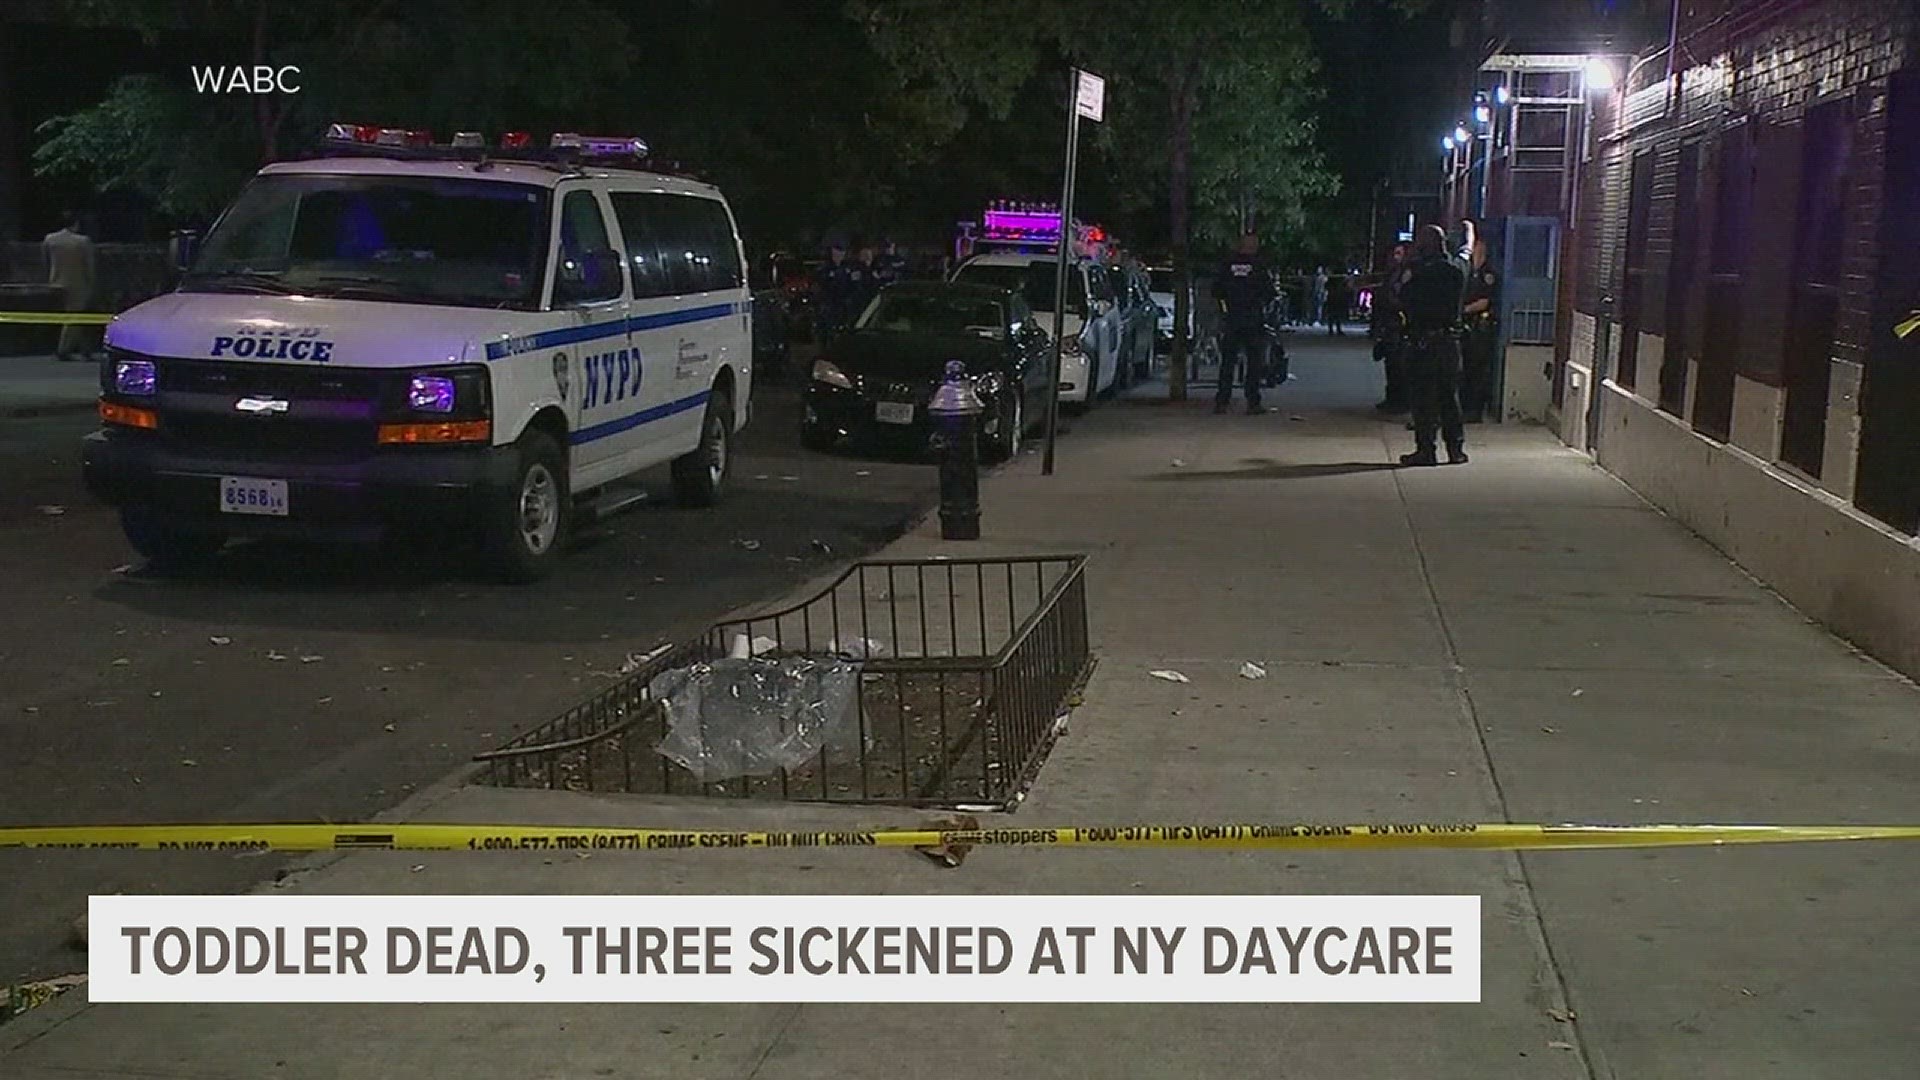 Two people were arrested in New York City after four toddlers were in contact with fentanyl, causing a death. The condition of the other three kids is unknown.